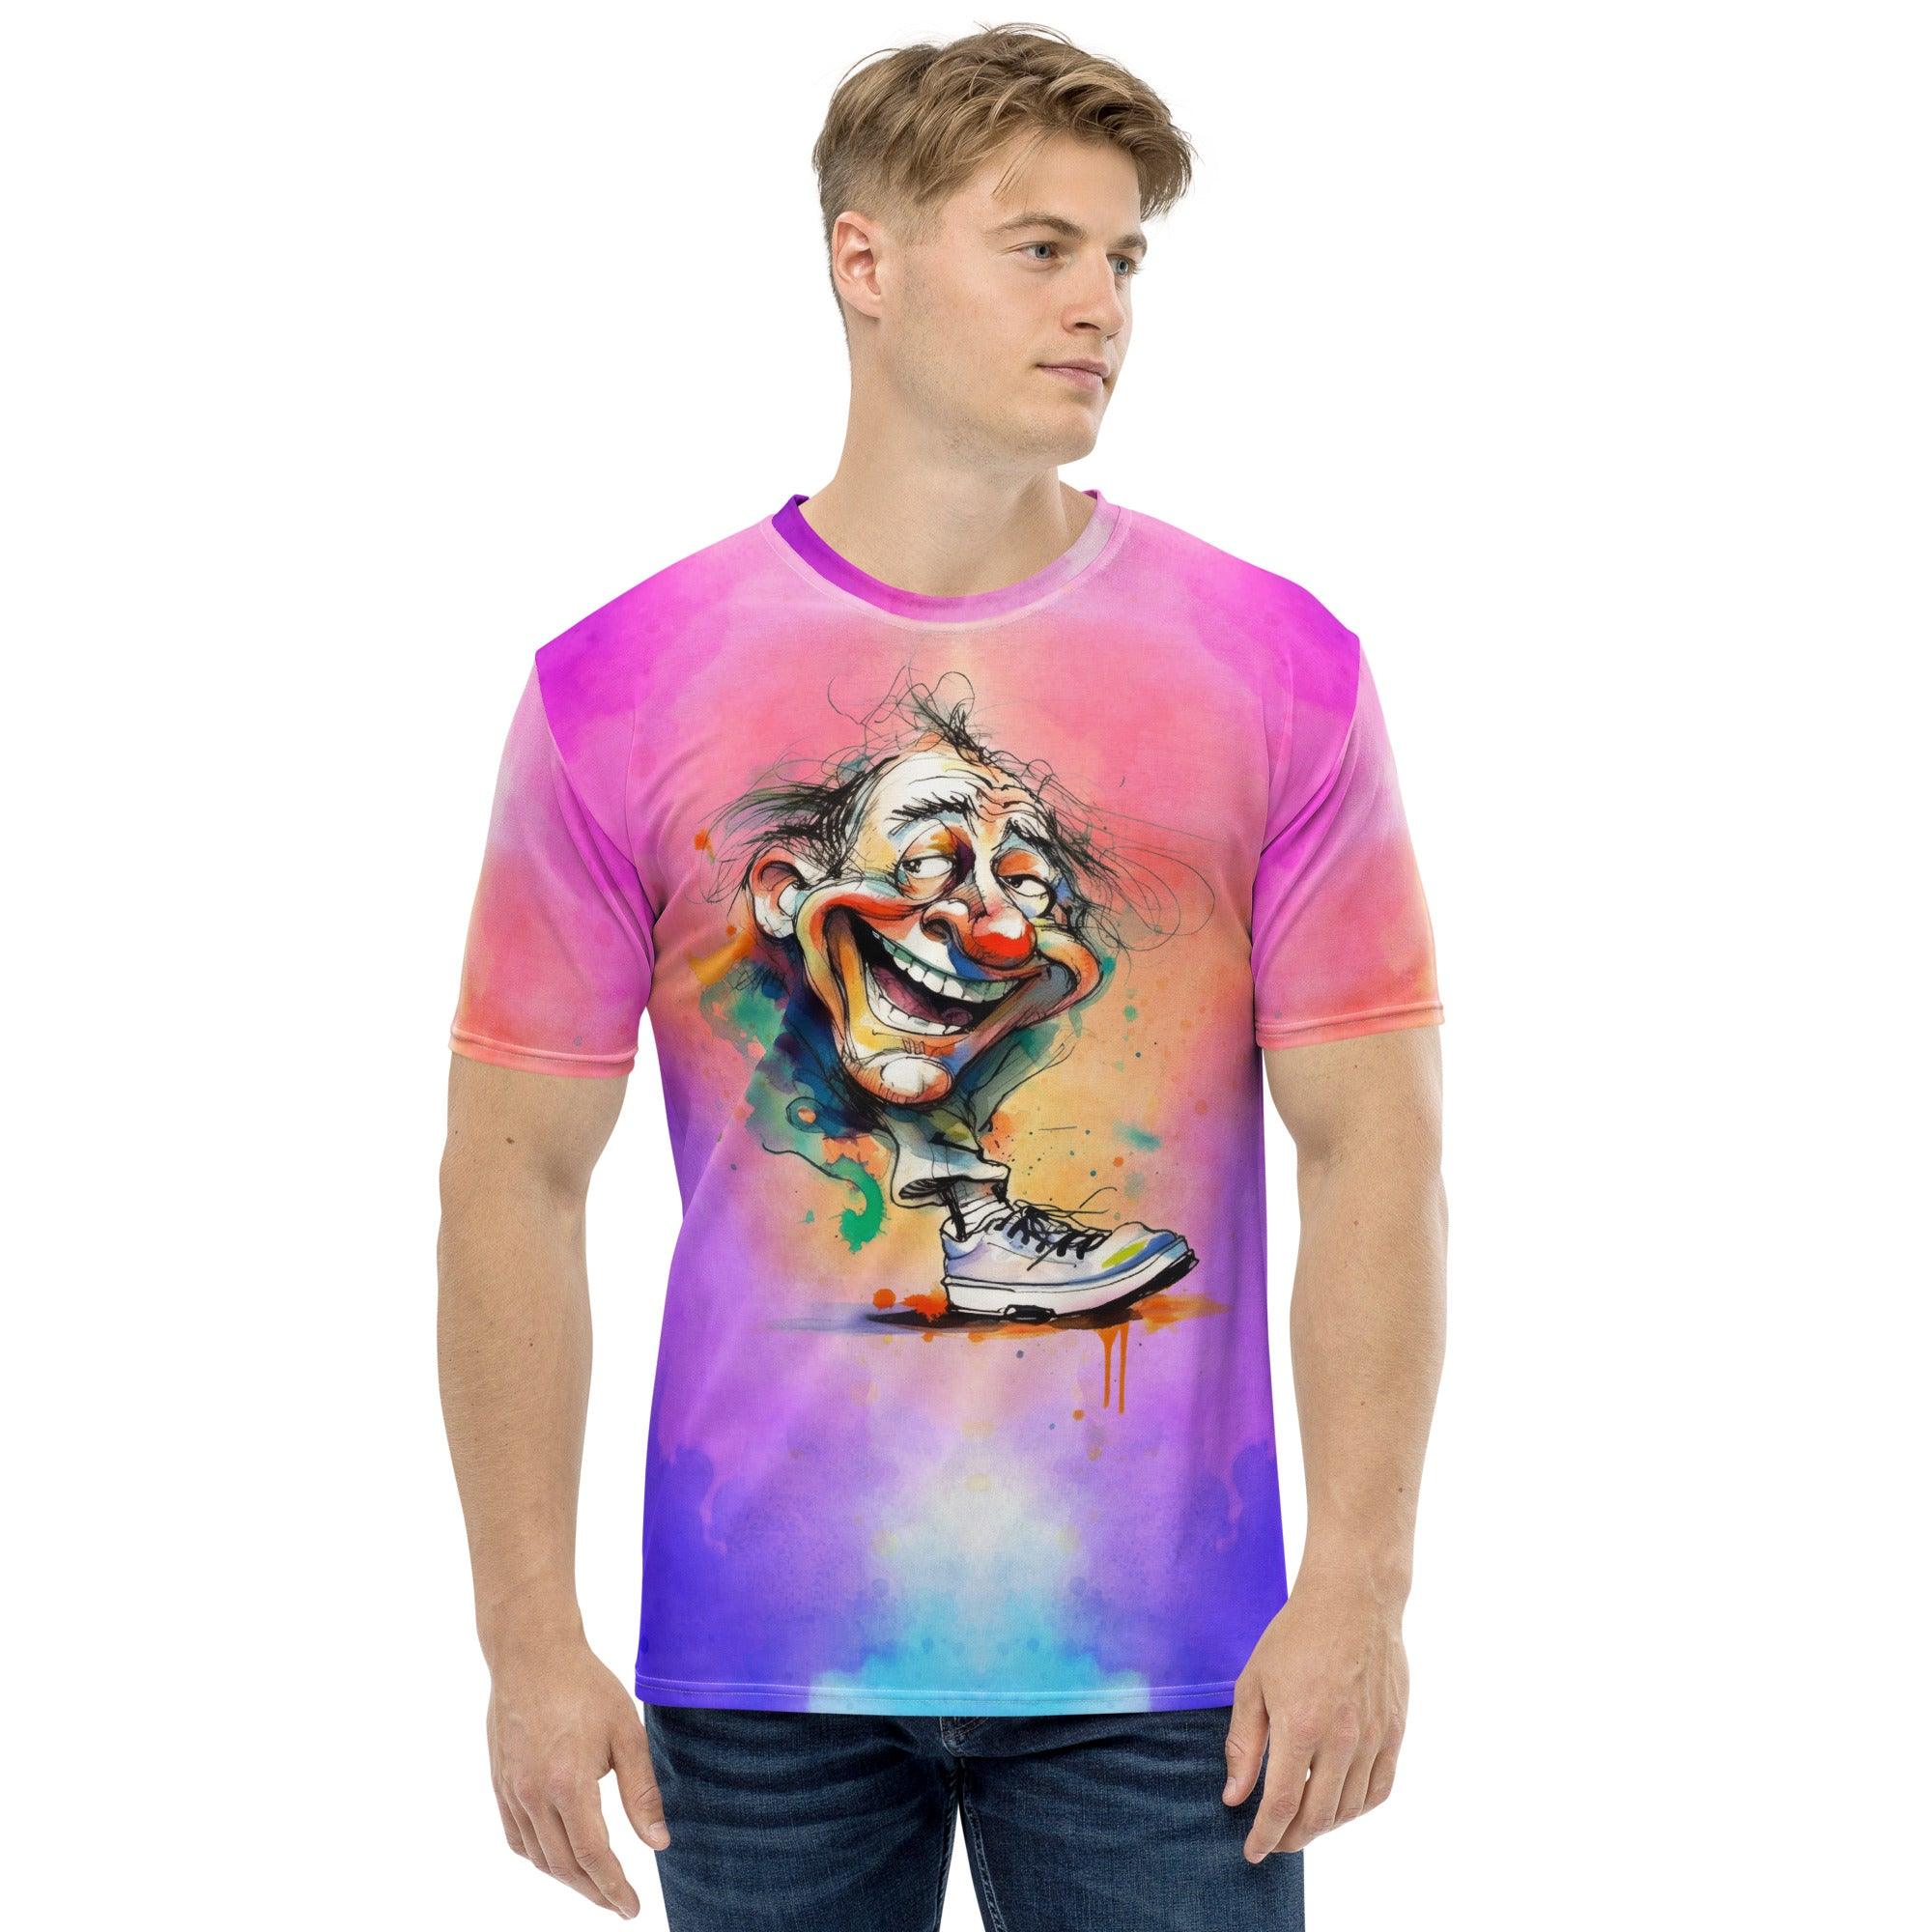 Celebrity Caricatures All-Over Print Men's Crew Neck T-Shirt - Beyond T-shirts